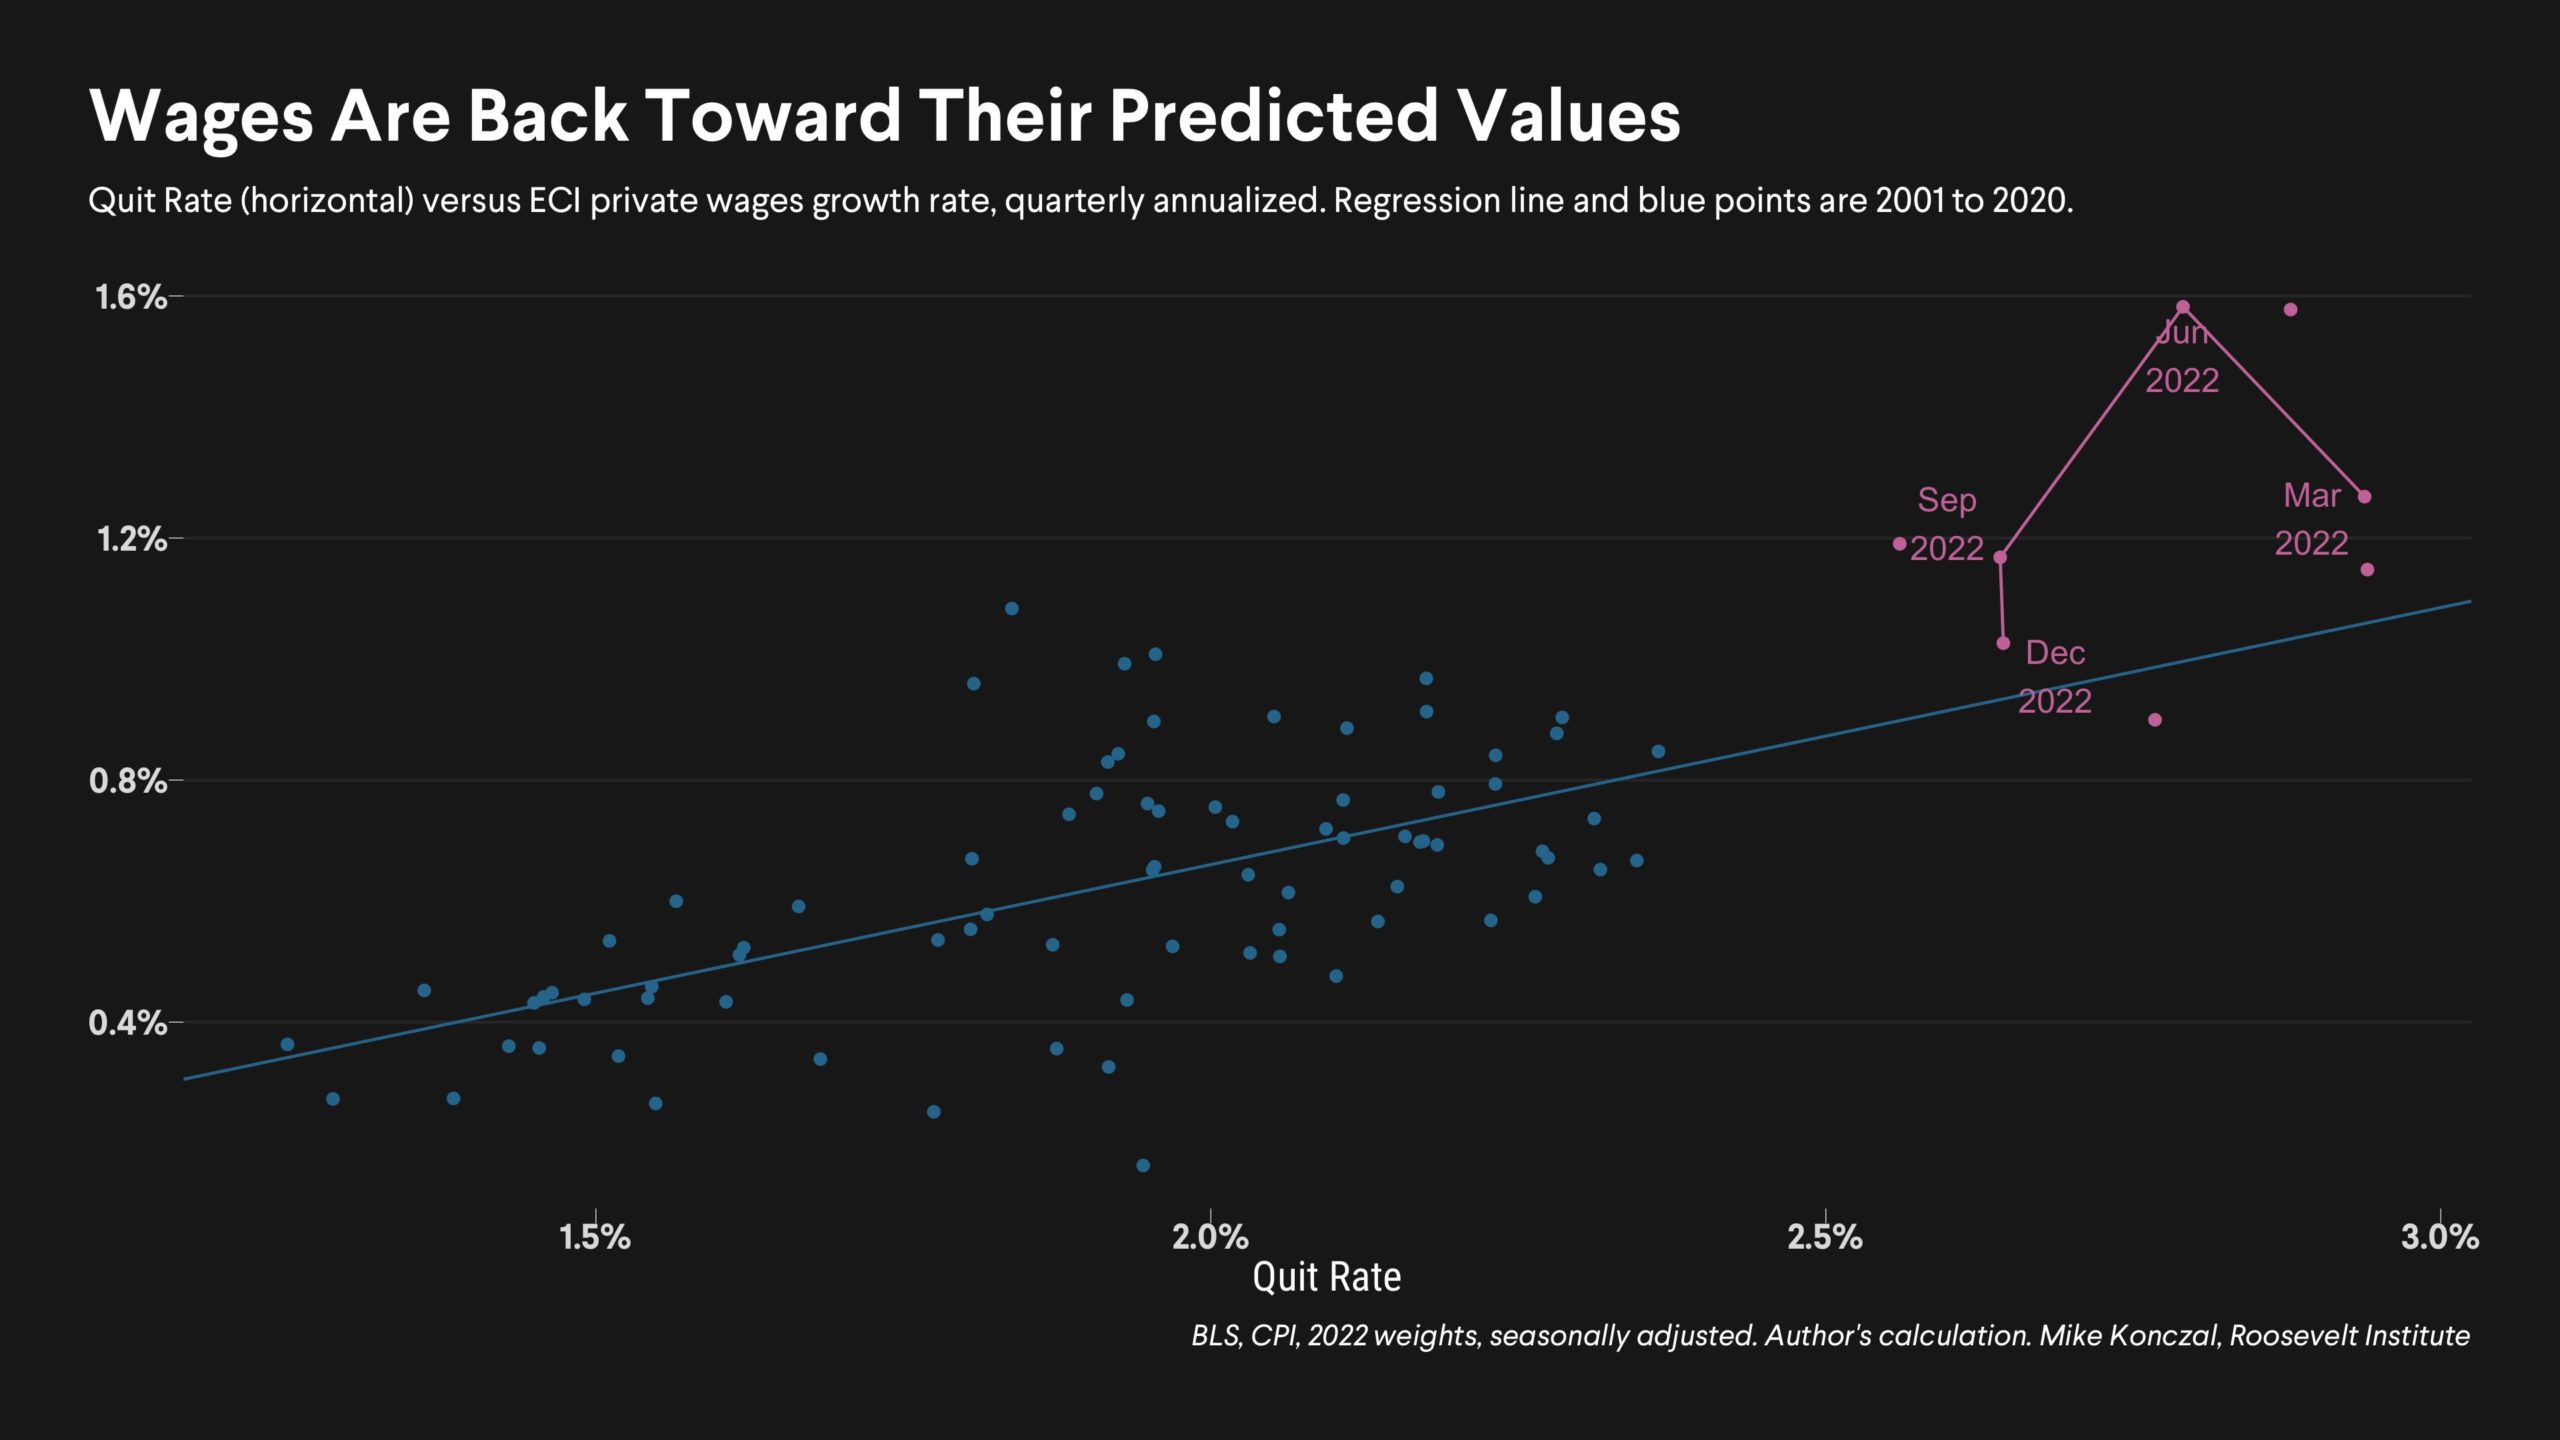 Wages are back towards their predicted values chart